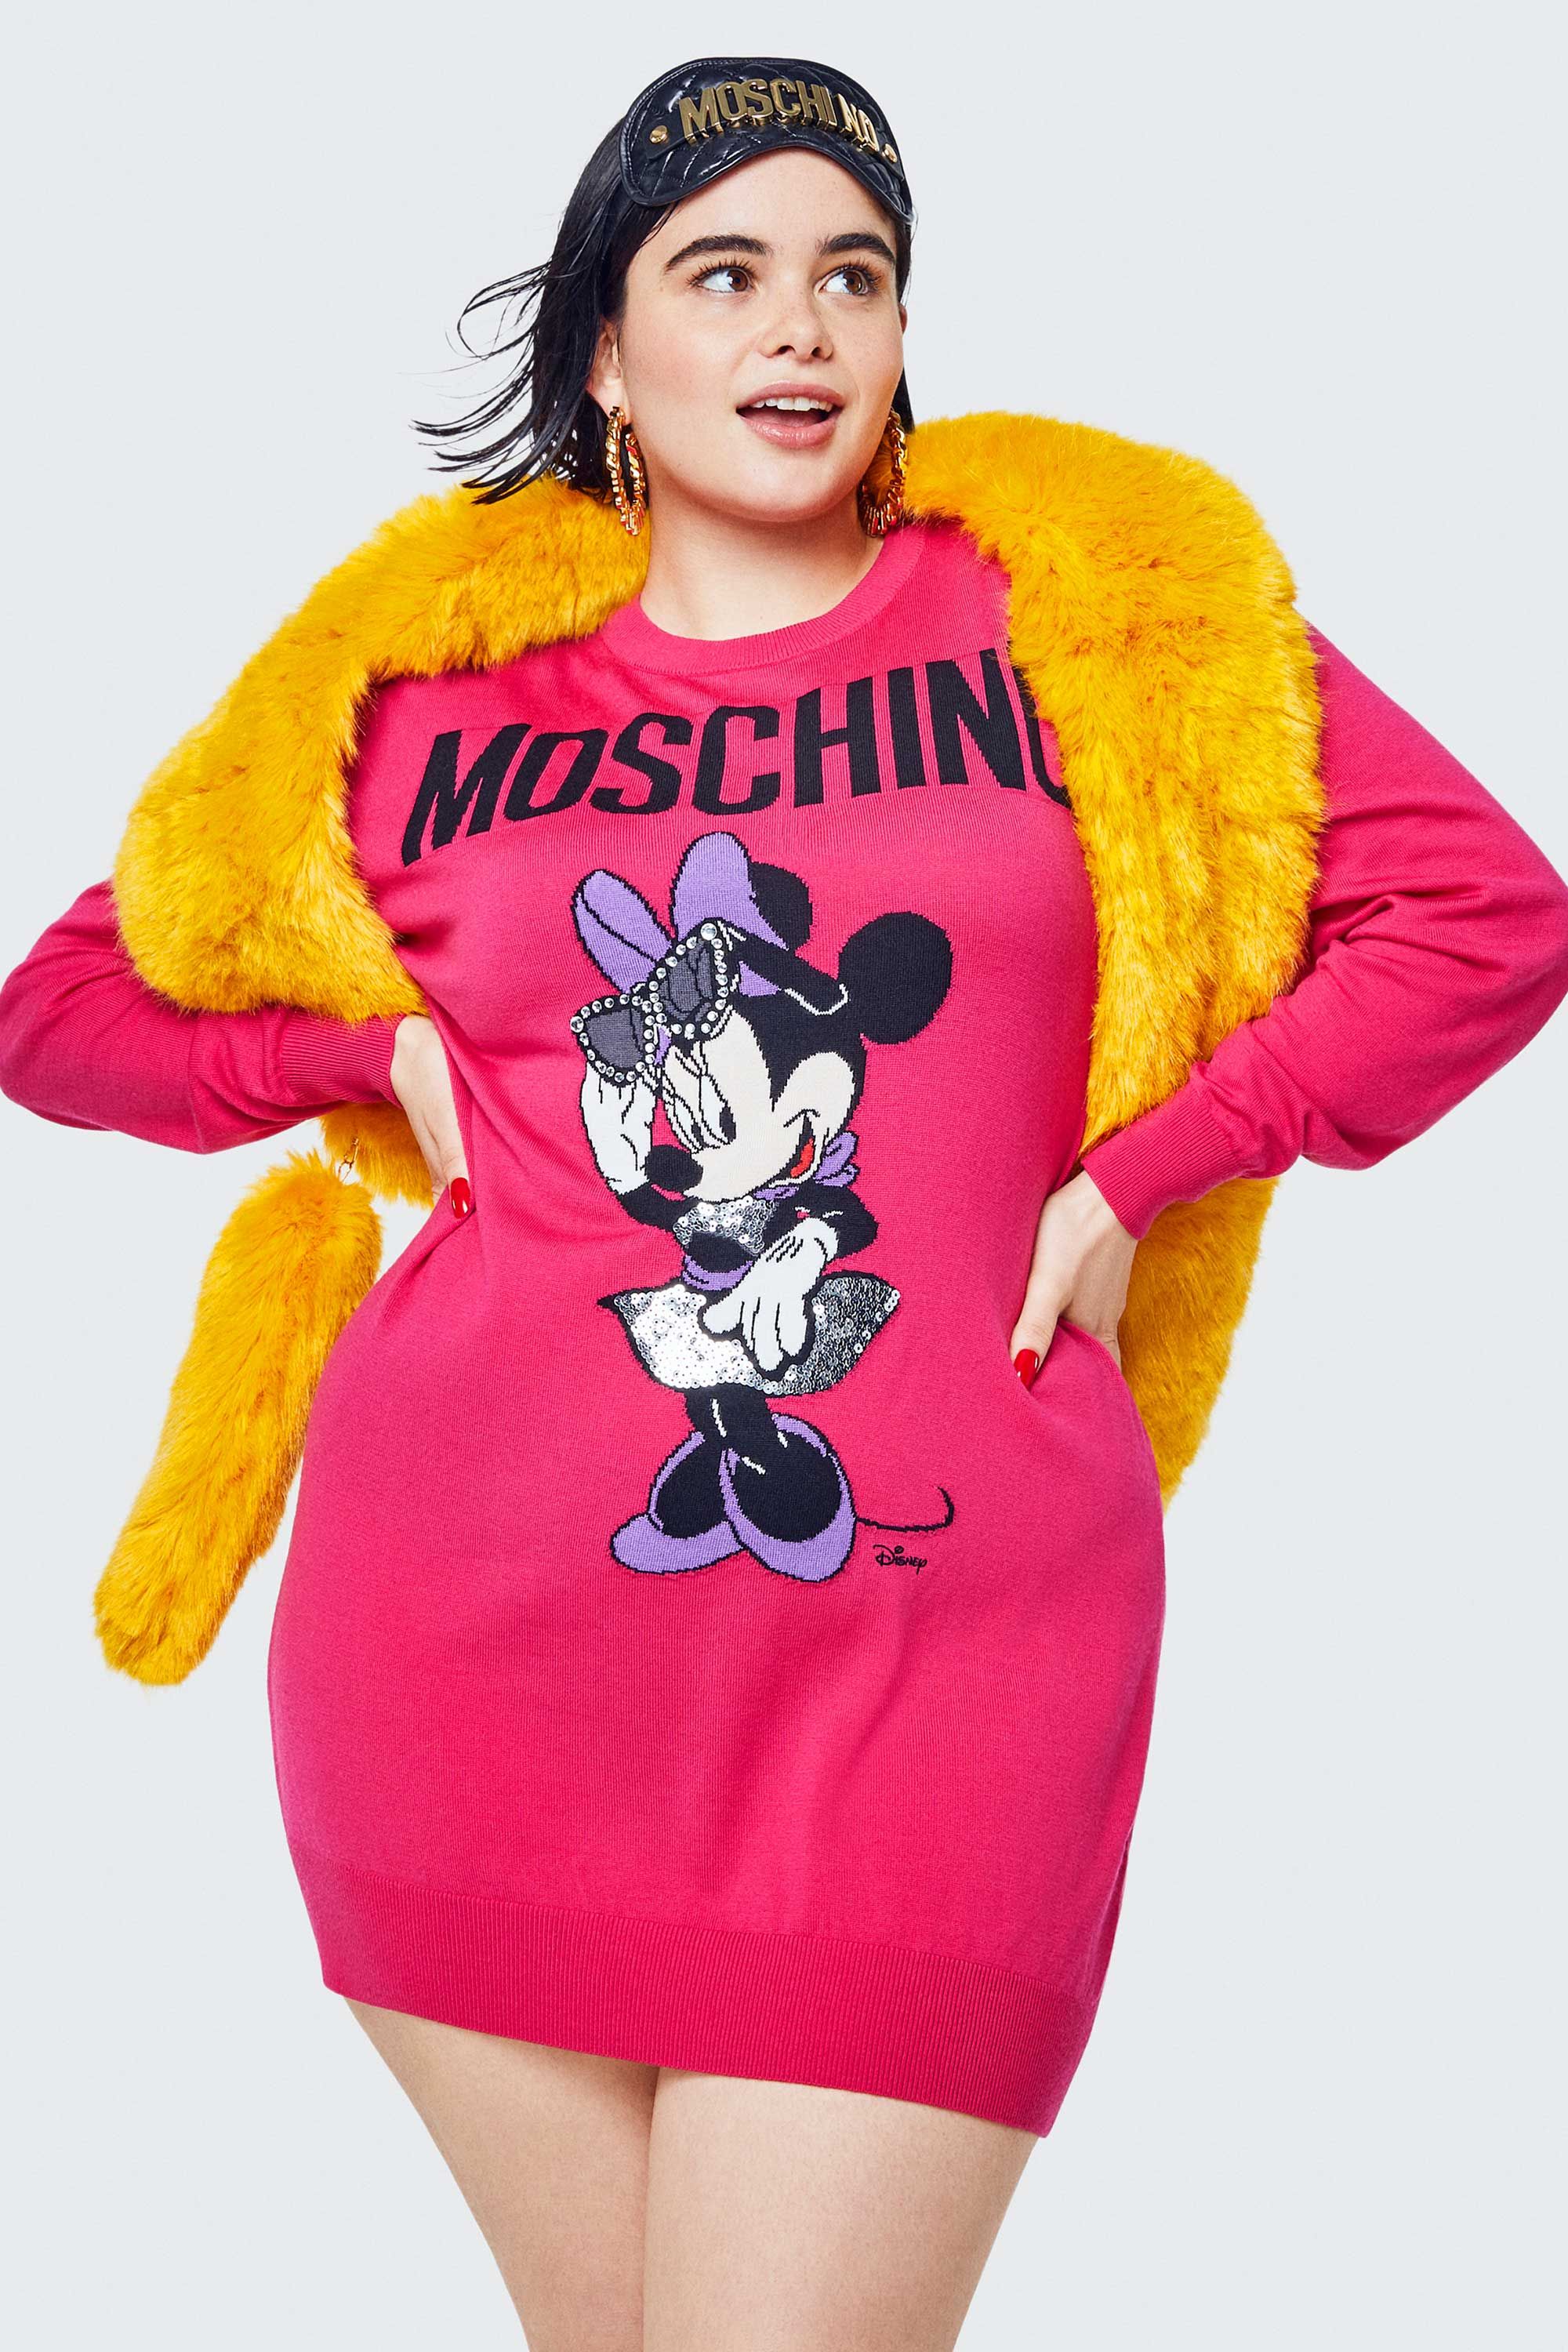 h&m and moschino collaboration